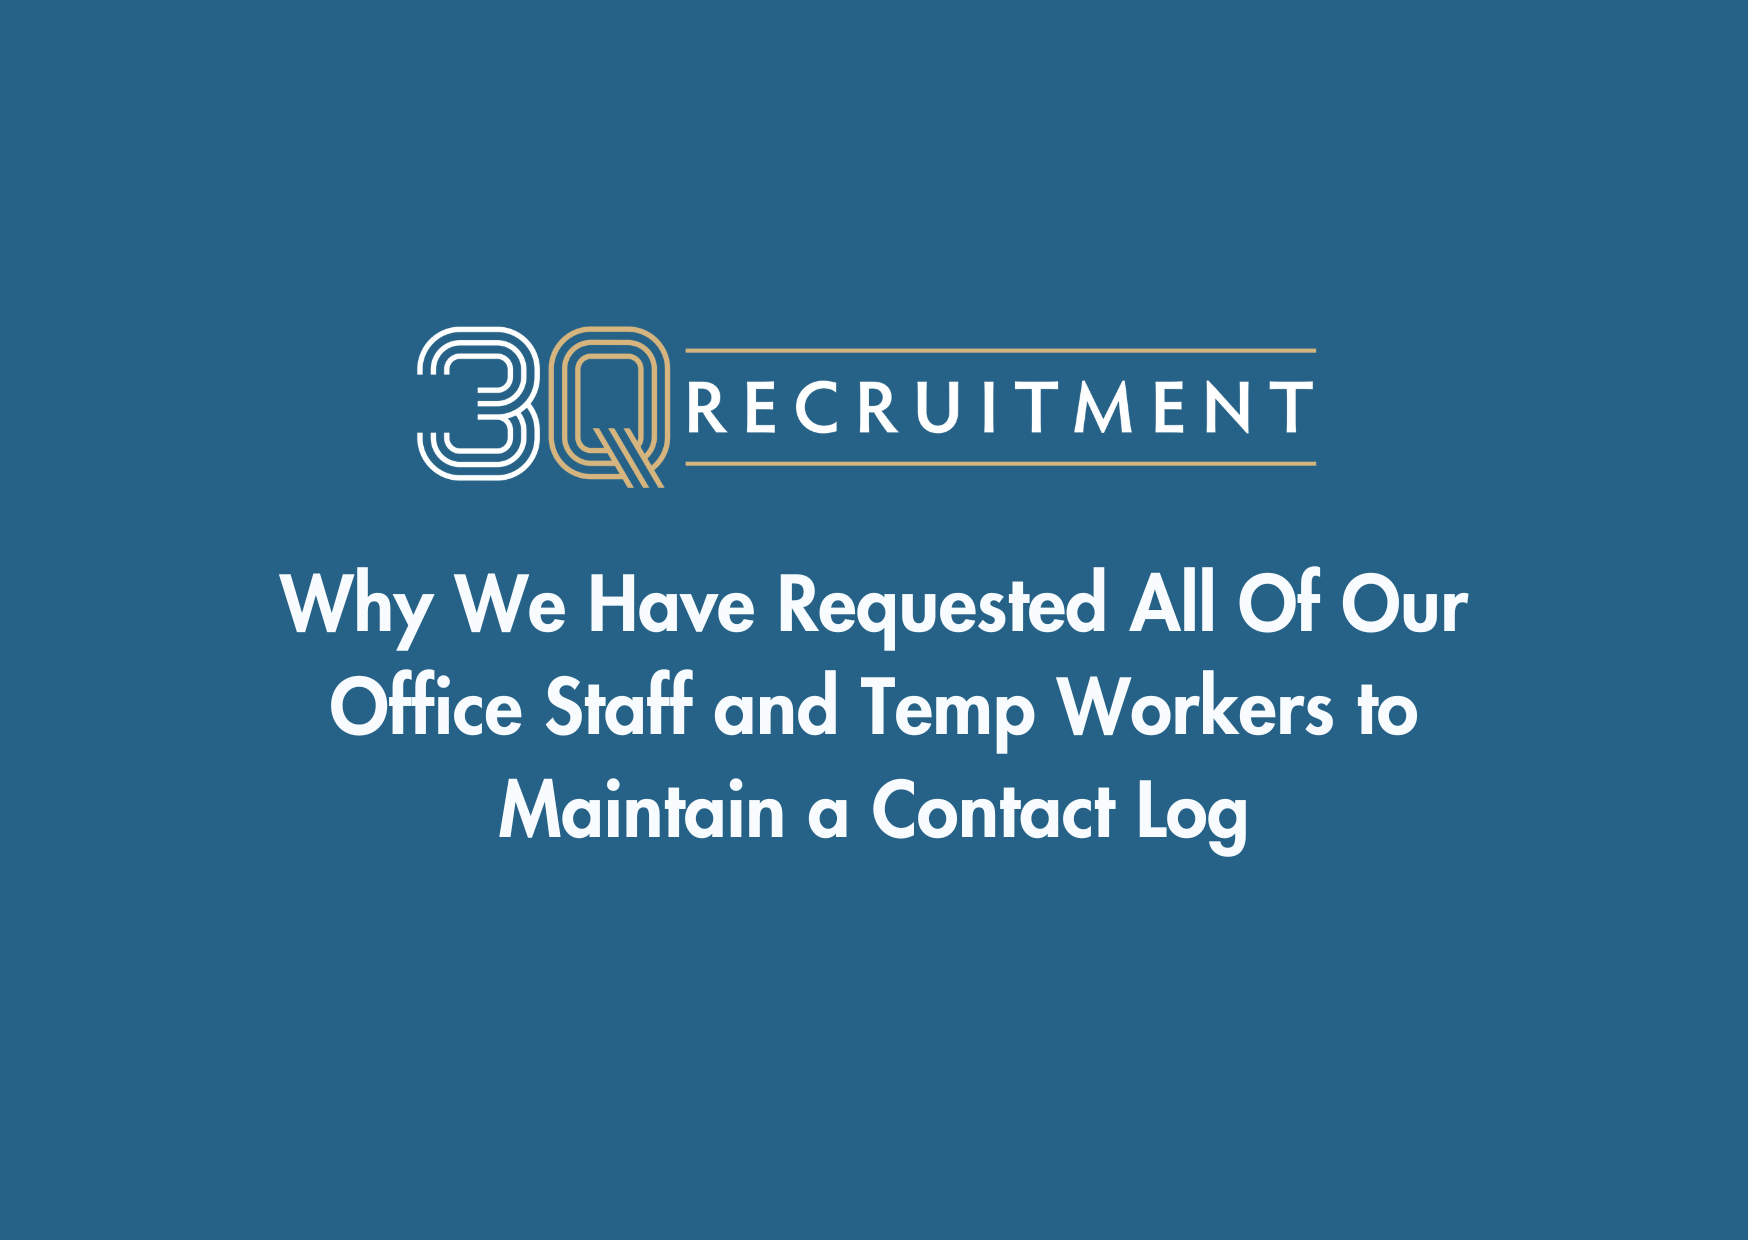 3Q Recruitment Why We Have Requested All Of Our Office Staff and Temp Workers to Maintain a Contact Log